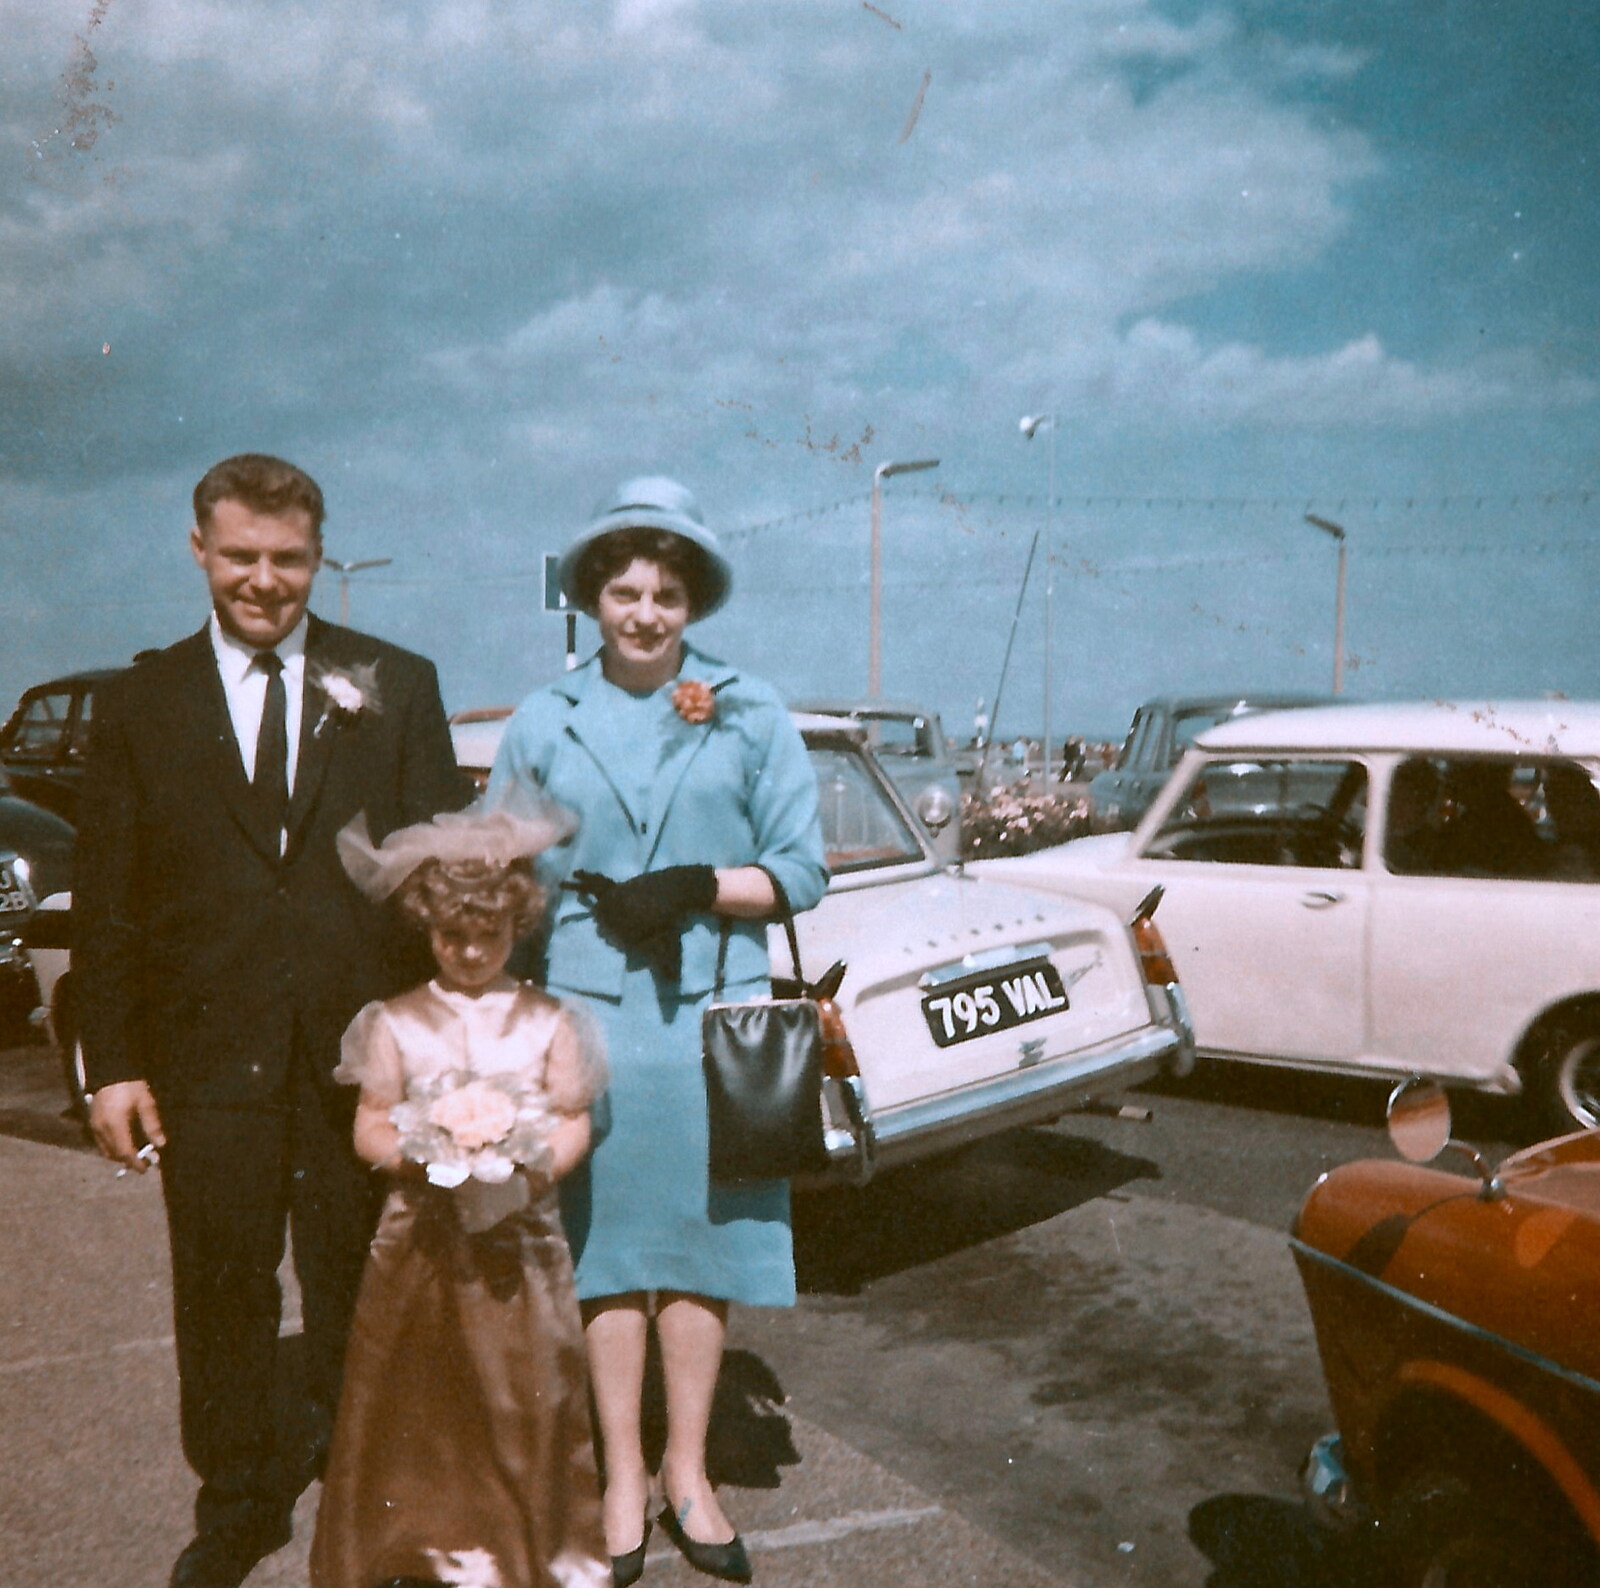 Family History: The 1960s - 24th January 2020: Unknown, but some cool cars